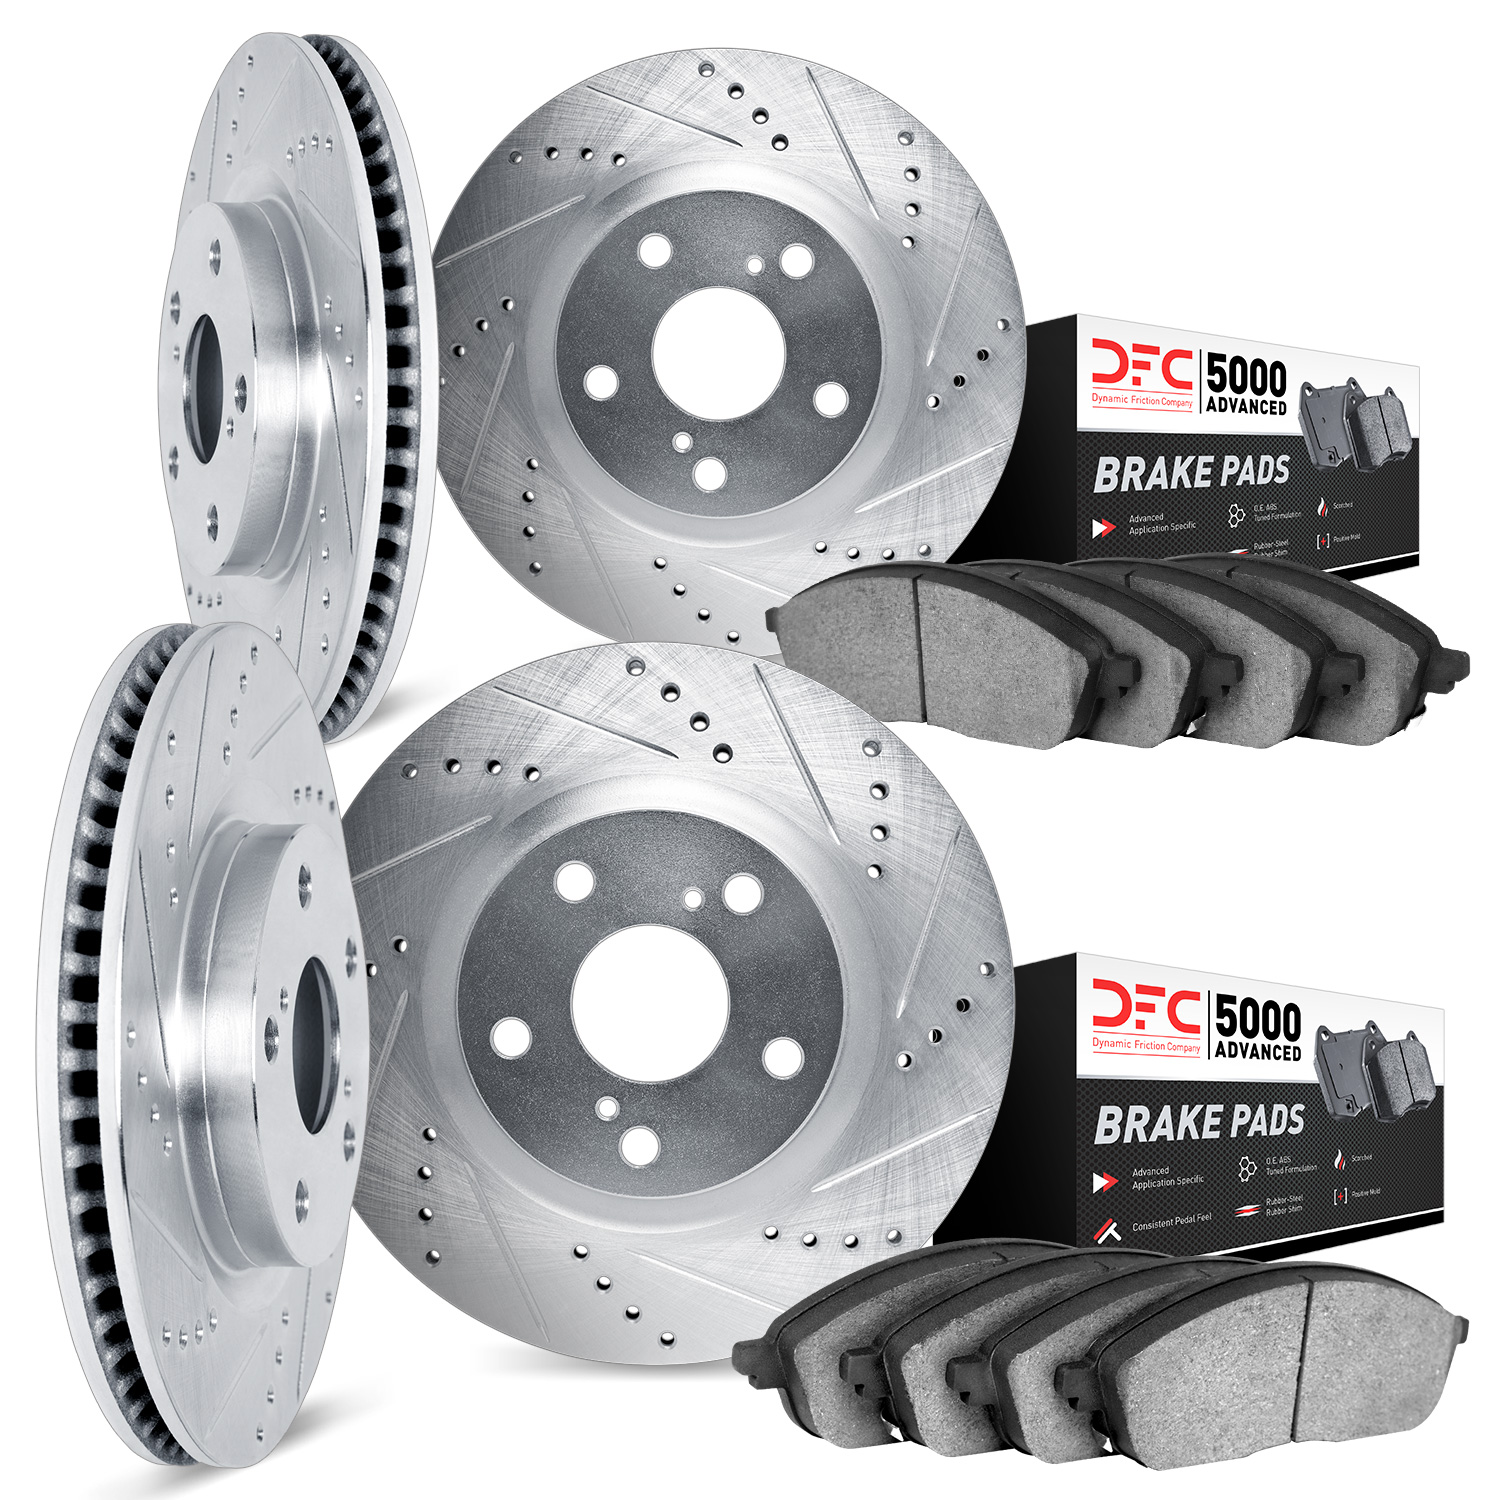 7504-63009 Drilled/Slotted Brake Rotors w/5000 Advanced Brake Pads Kit [Silver], 2017-2019 Mercedes-Benz, Position: Front and Re